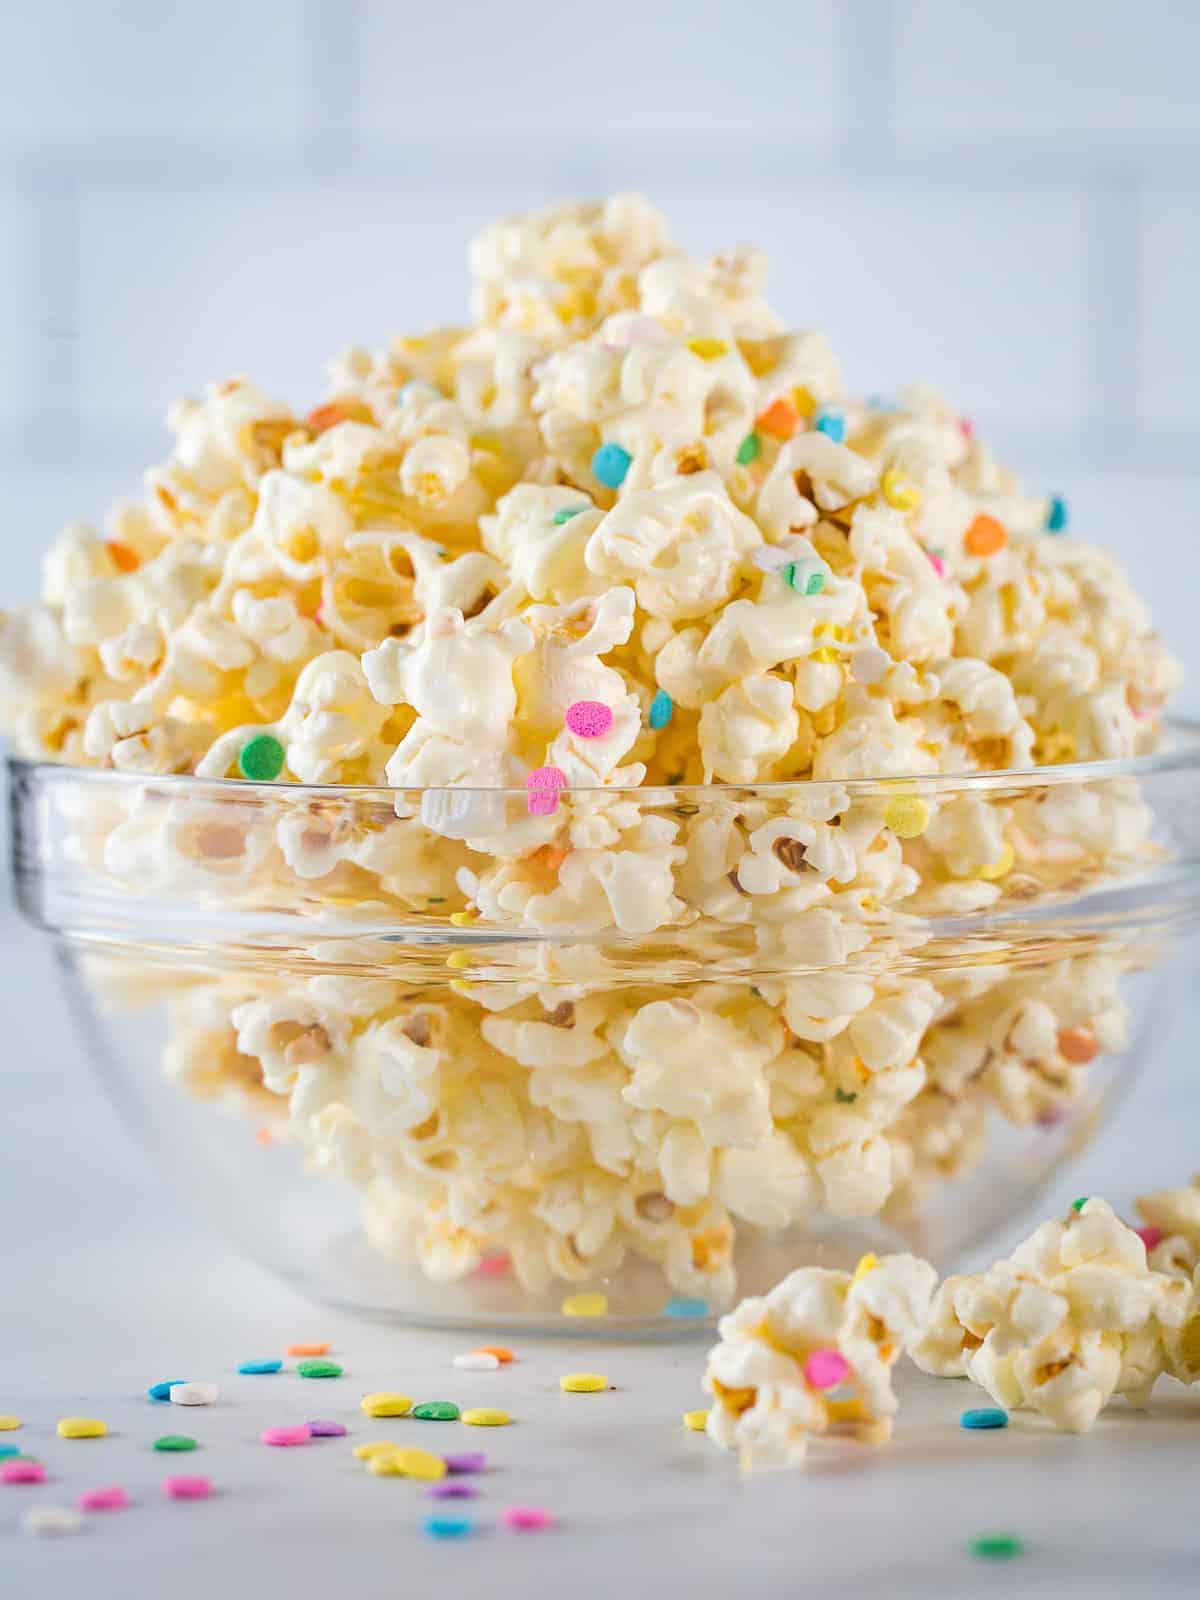 White chocolate popcorn with colorful sprinkles in a glass bowl.